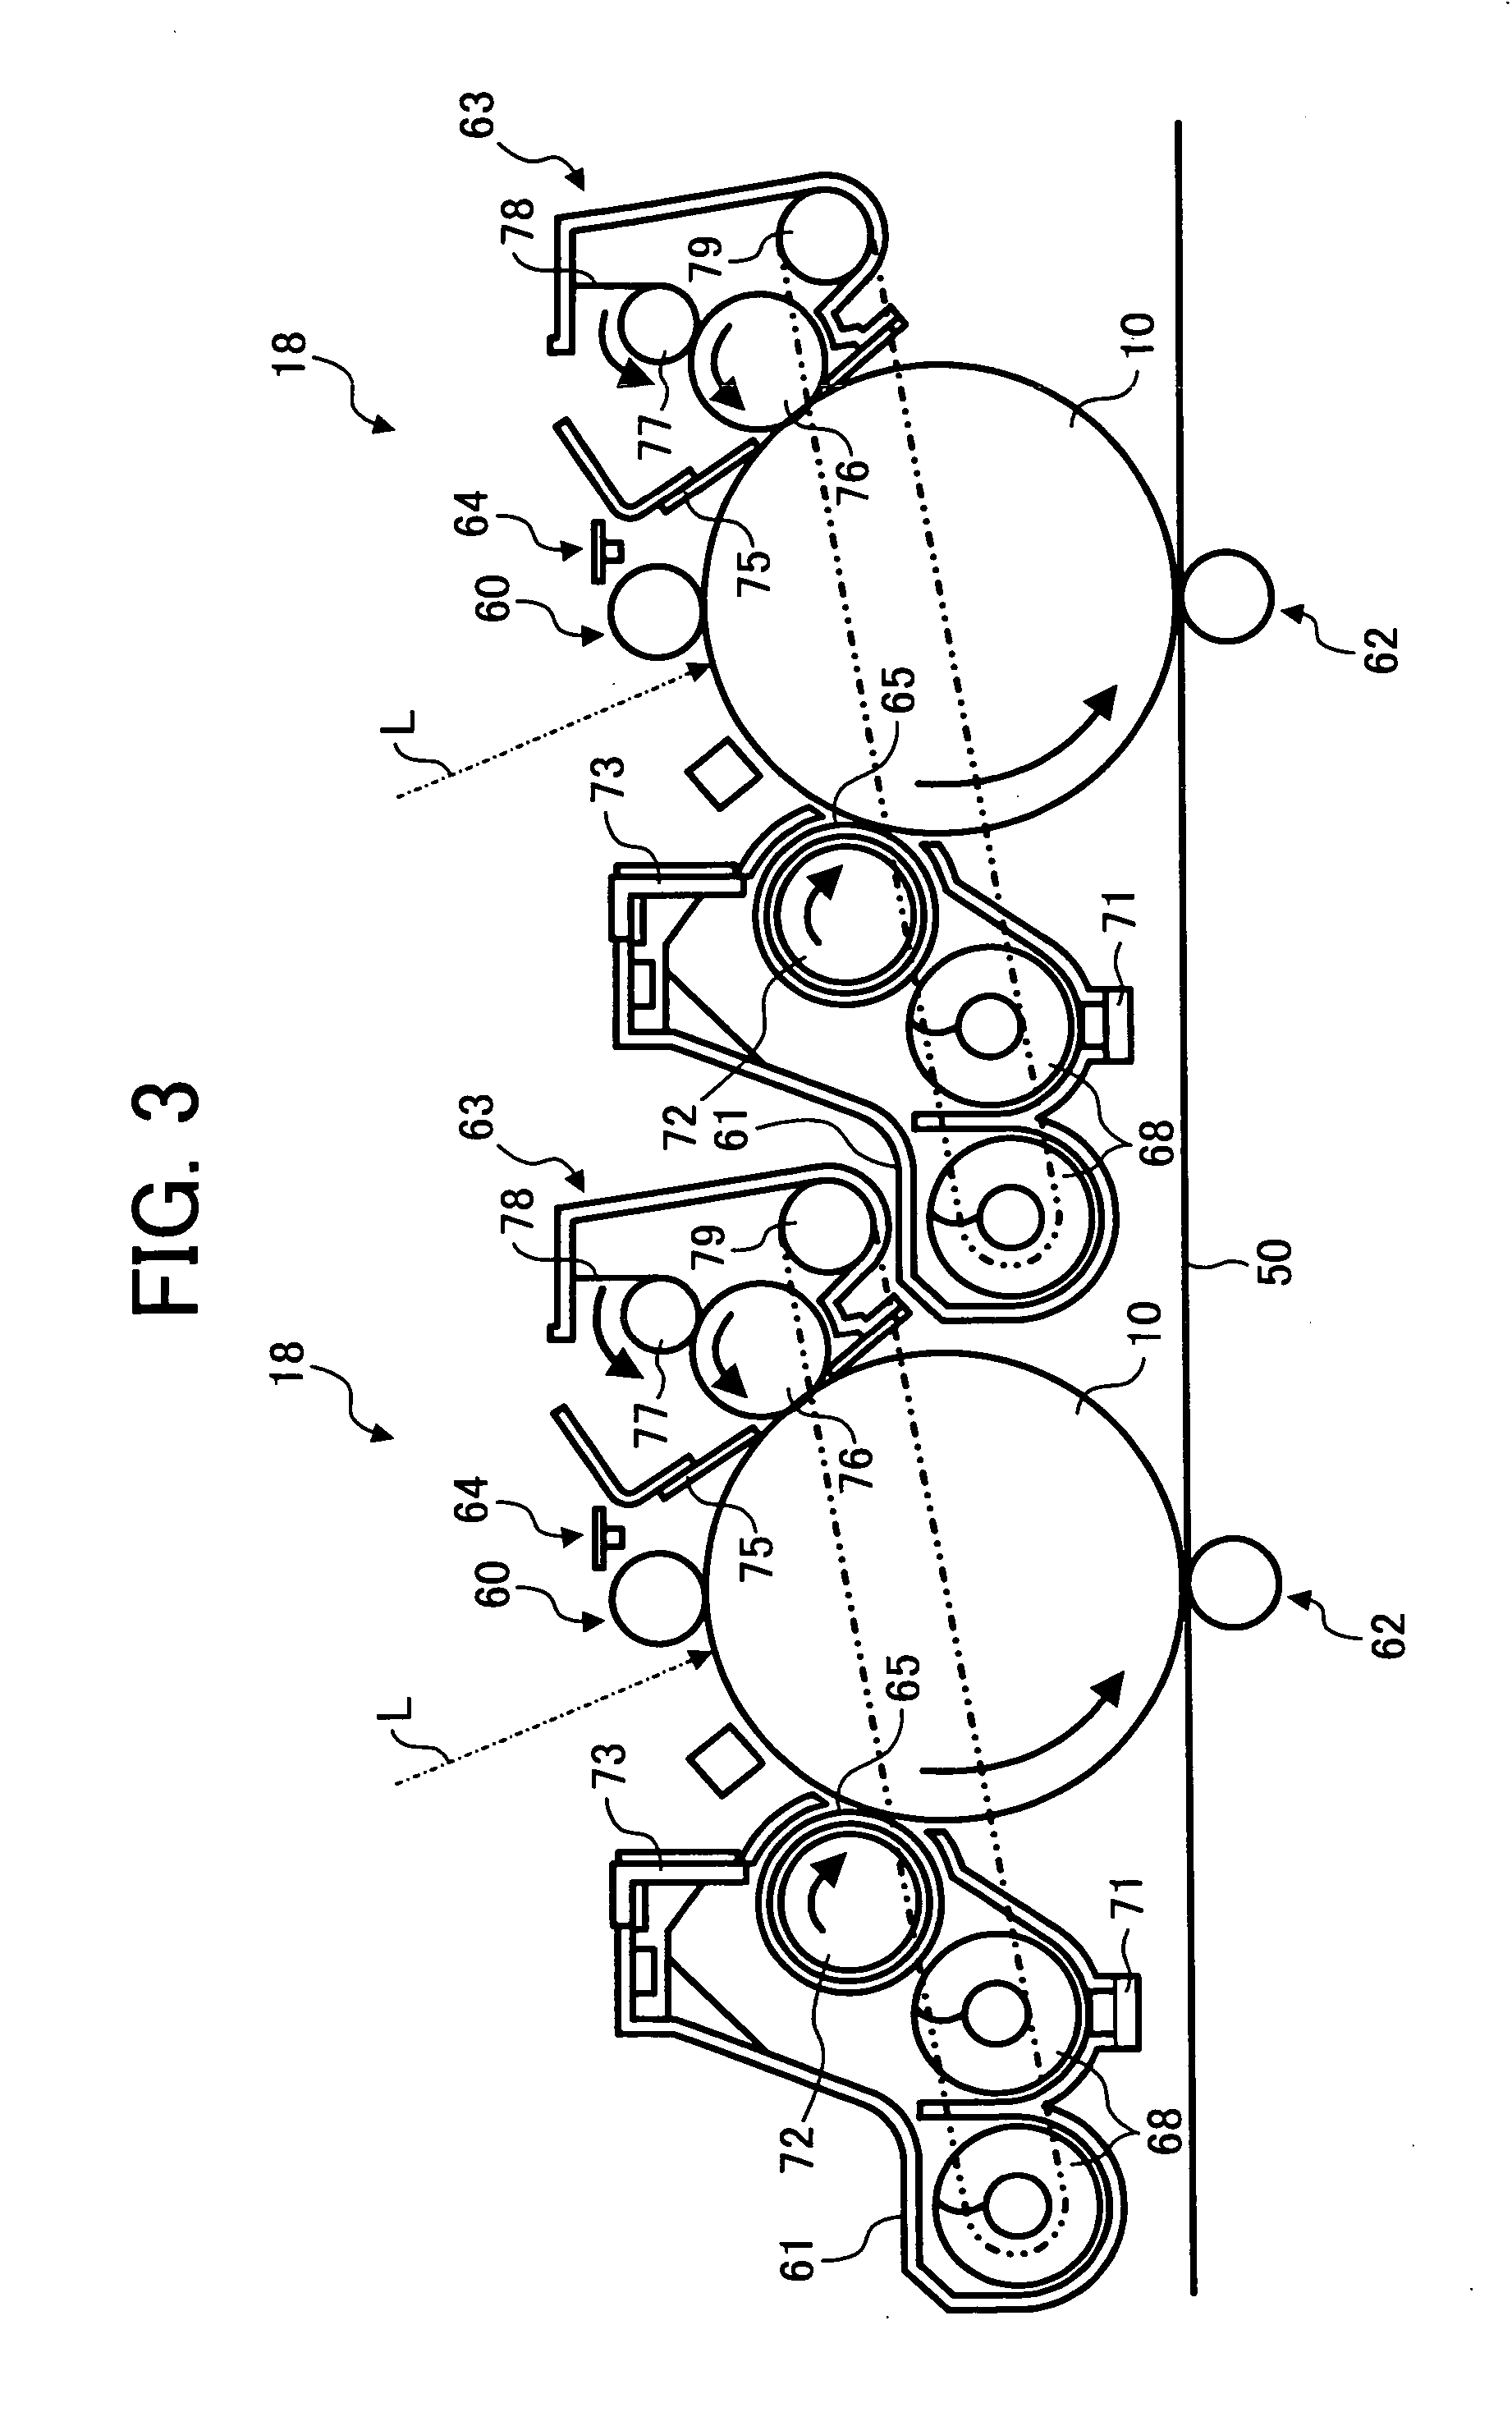 Toner, method for manufacturing the toner, developer including the toner, container containing the toner, and image forming method and apparatus and process cartridge using the toner